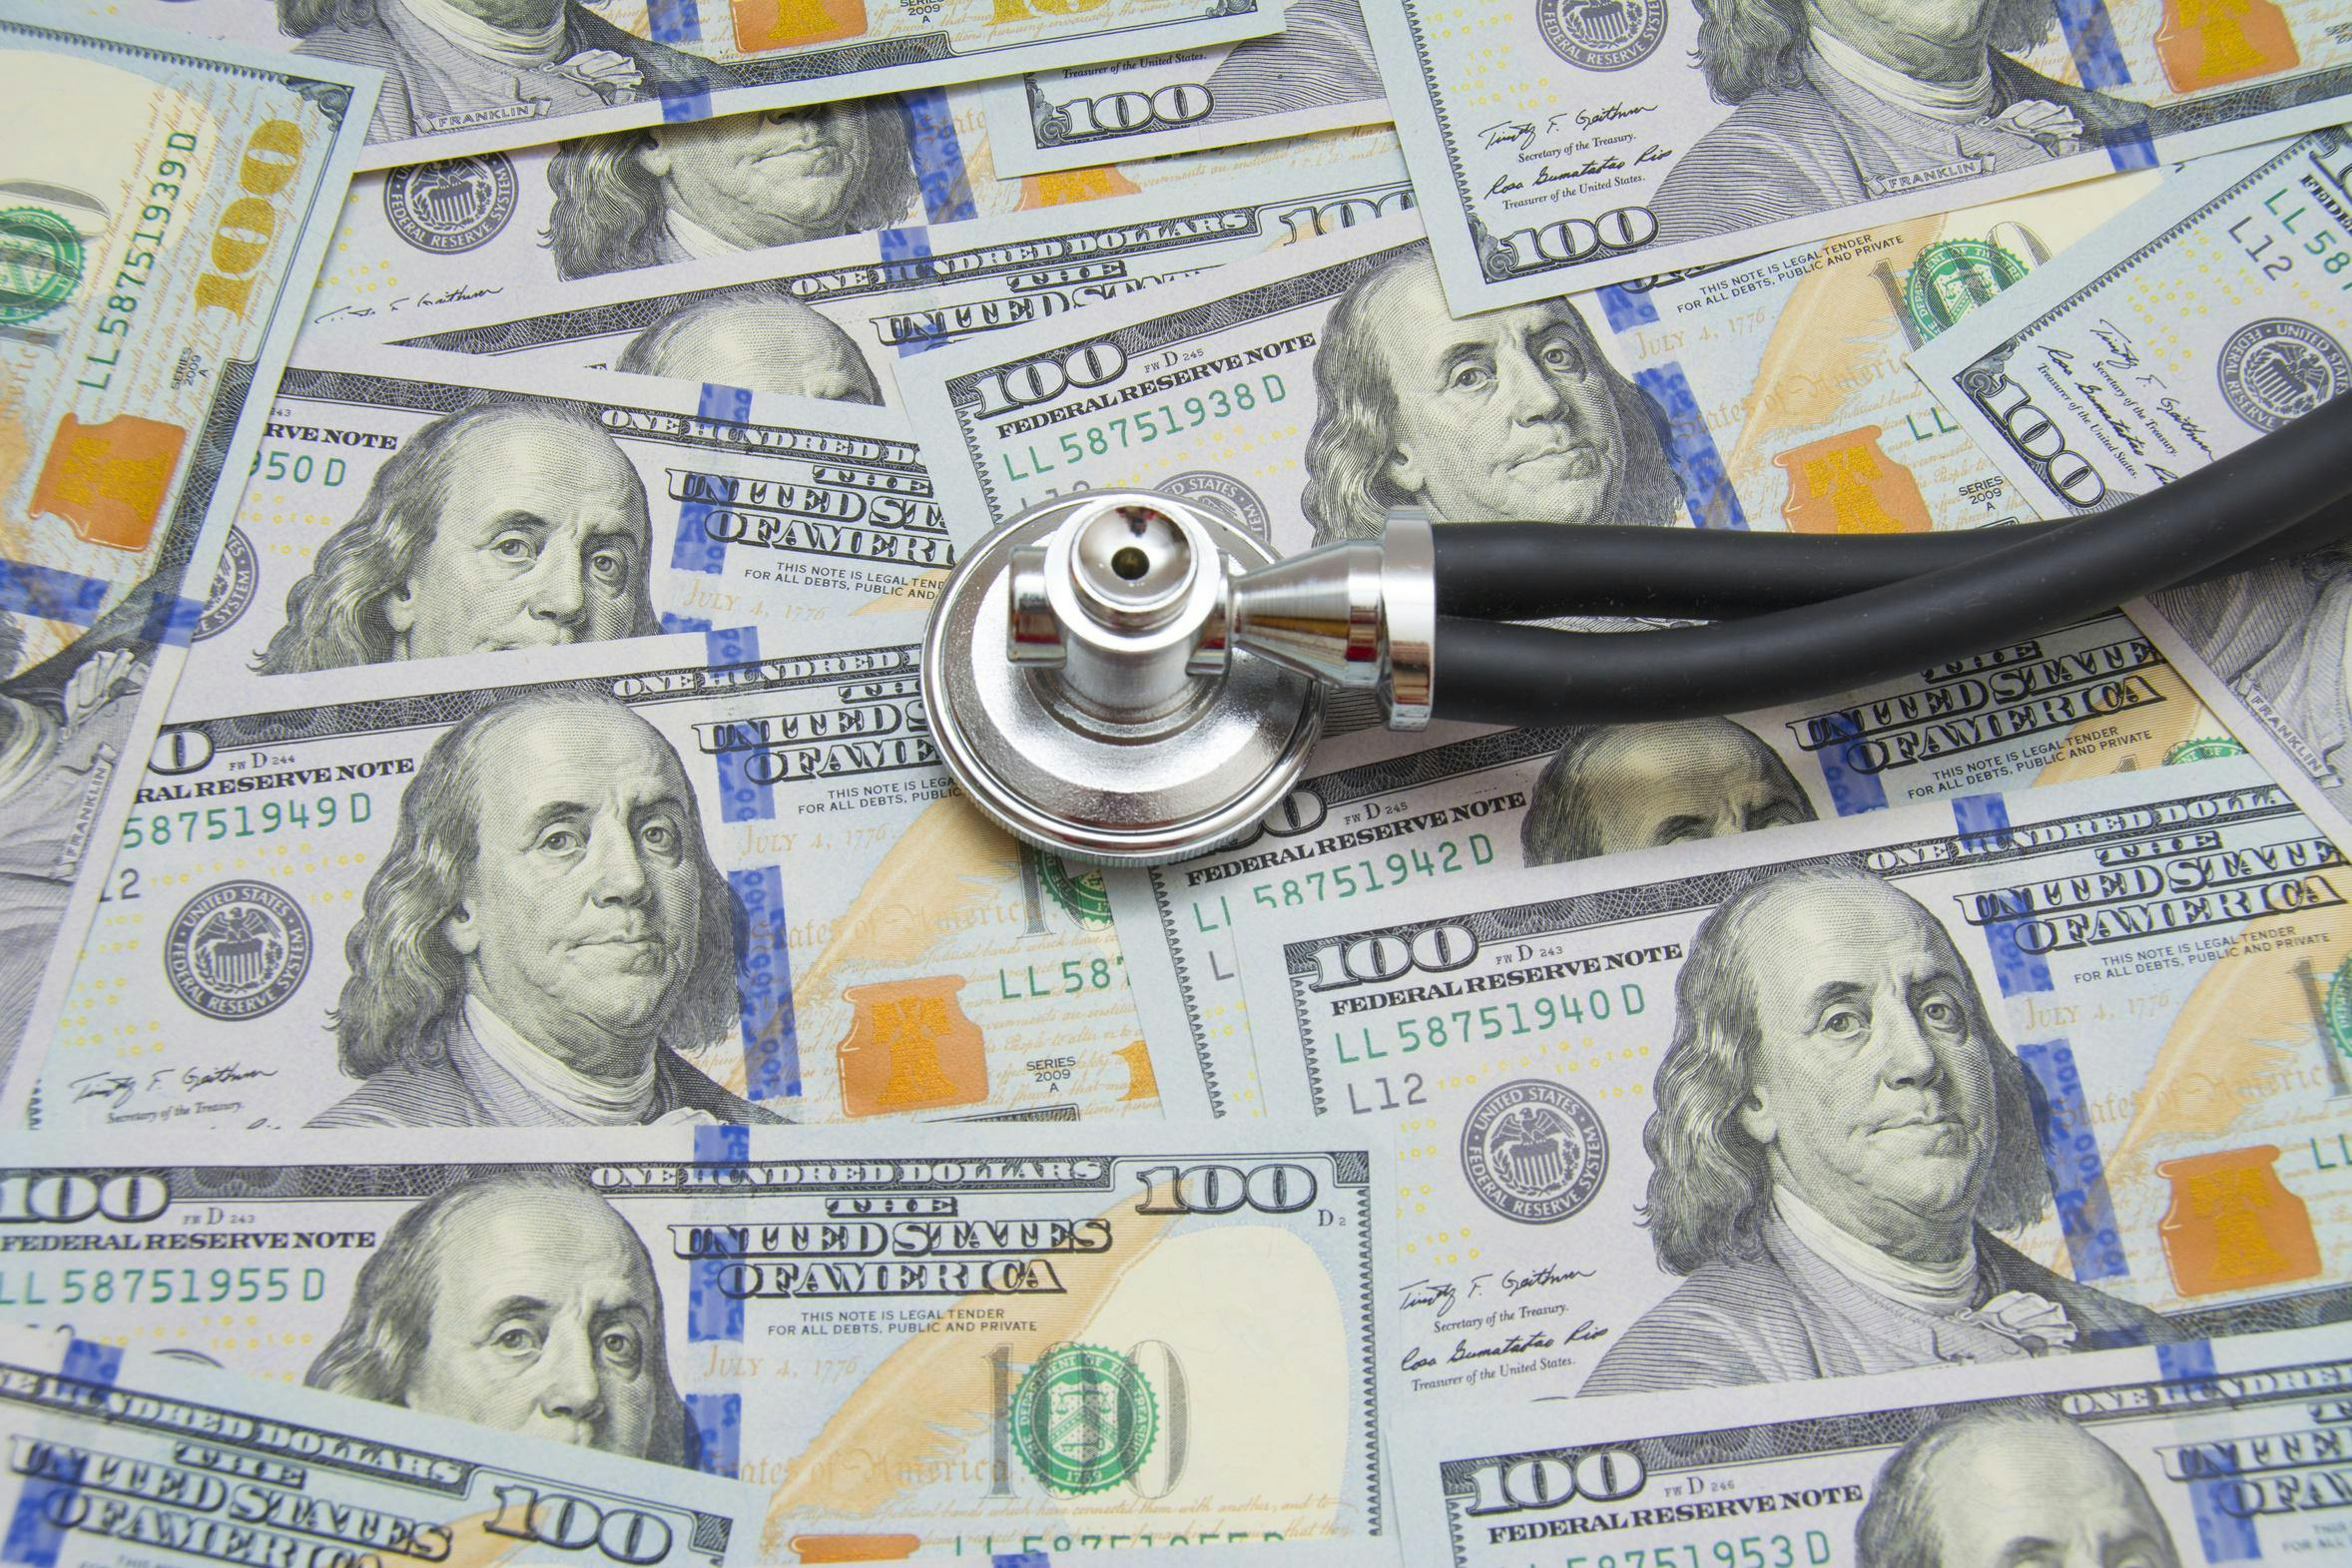 Stethoscope on top of a pile of money.